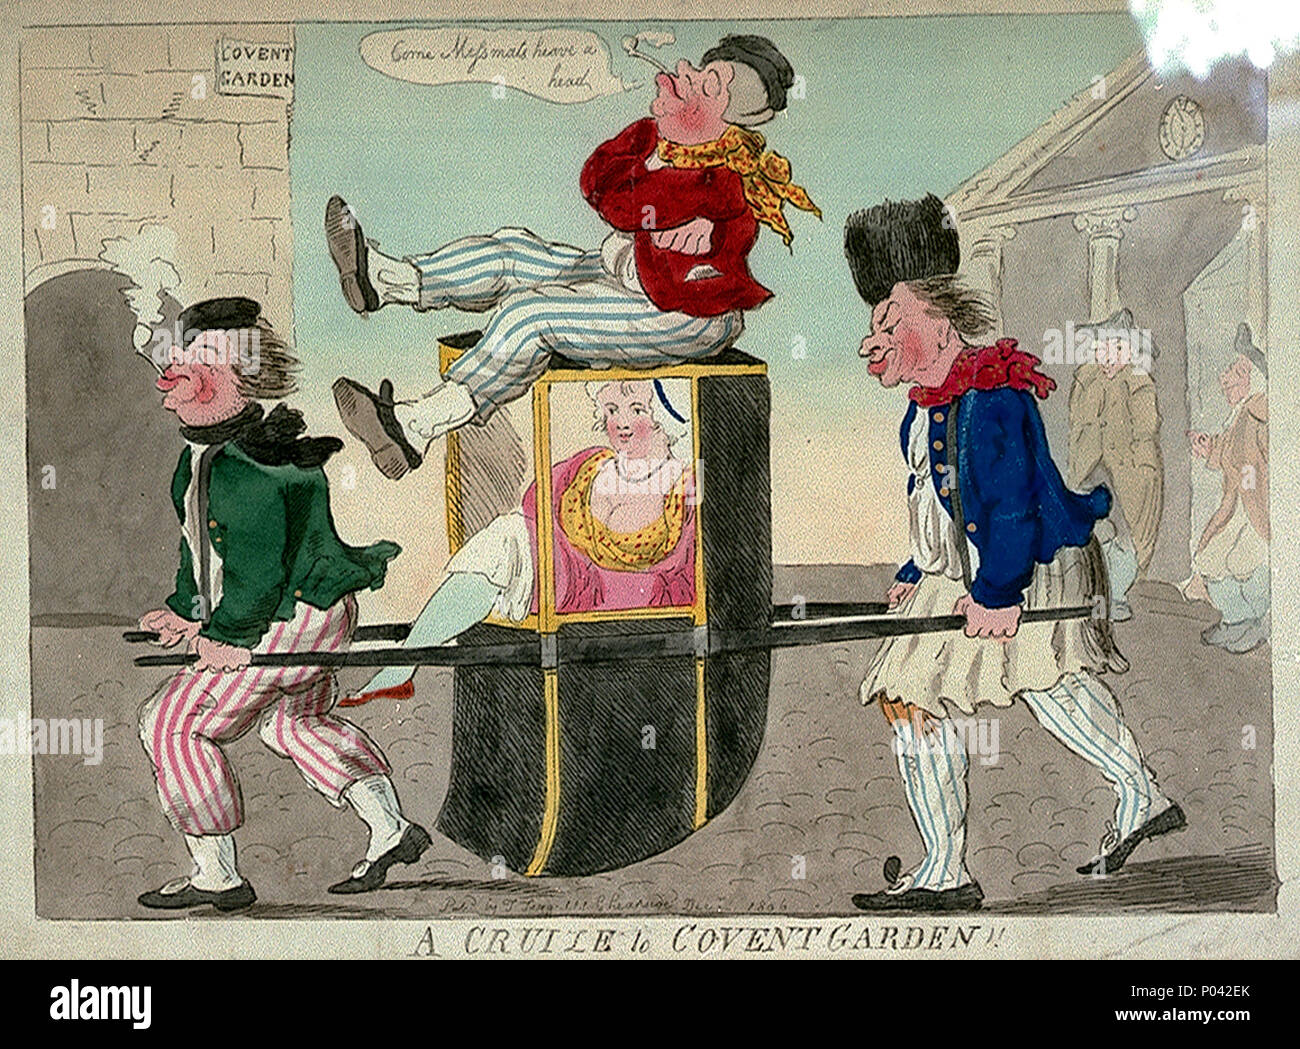 .  English: A Cruize to Covent Garden!! (caricature) Hand-coloured.; Plate No.8.  . 1 December 1806.    Thomas Tegg  (1776–1845)    Description British publisher, printer, bookseller and stationer English publisher  Date of birth/death 4 March 1776 21 April 1845  Location of birth/death Wimbledon Wimbledon  Work period 1799-1846  Work location London  Authority control  : Q7794394 VIAF:?2902902 ISNI:?0000 0000 8351 1340 LCCN:?no89020646 GND:?104331933 SUDOC:?159196906 WorldCat 77 A Cruize to Covent Garden!! (caricature) RMG PW4168 Stock Photo